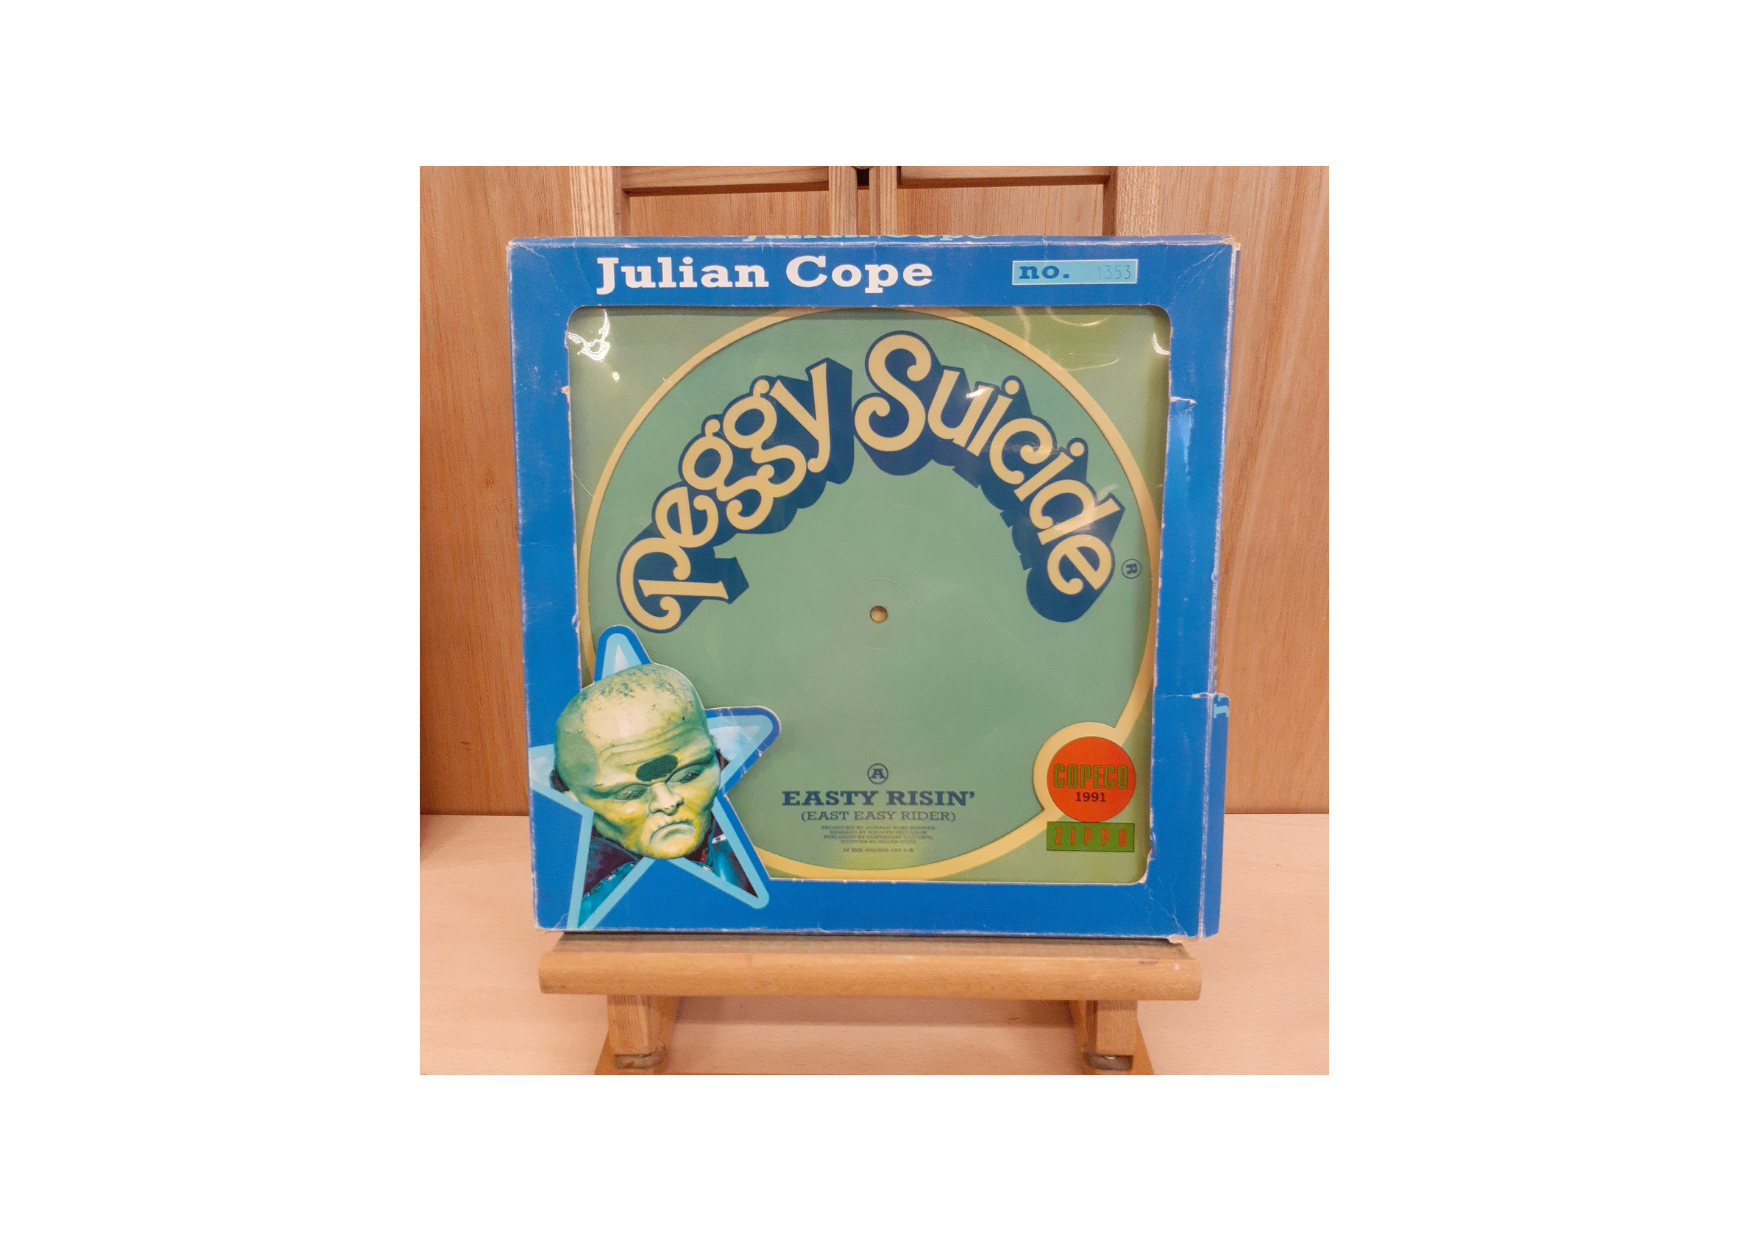 Julian Cope - Easty Risin' (East Easy Rider) 12" Boxed Front View